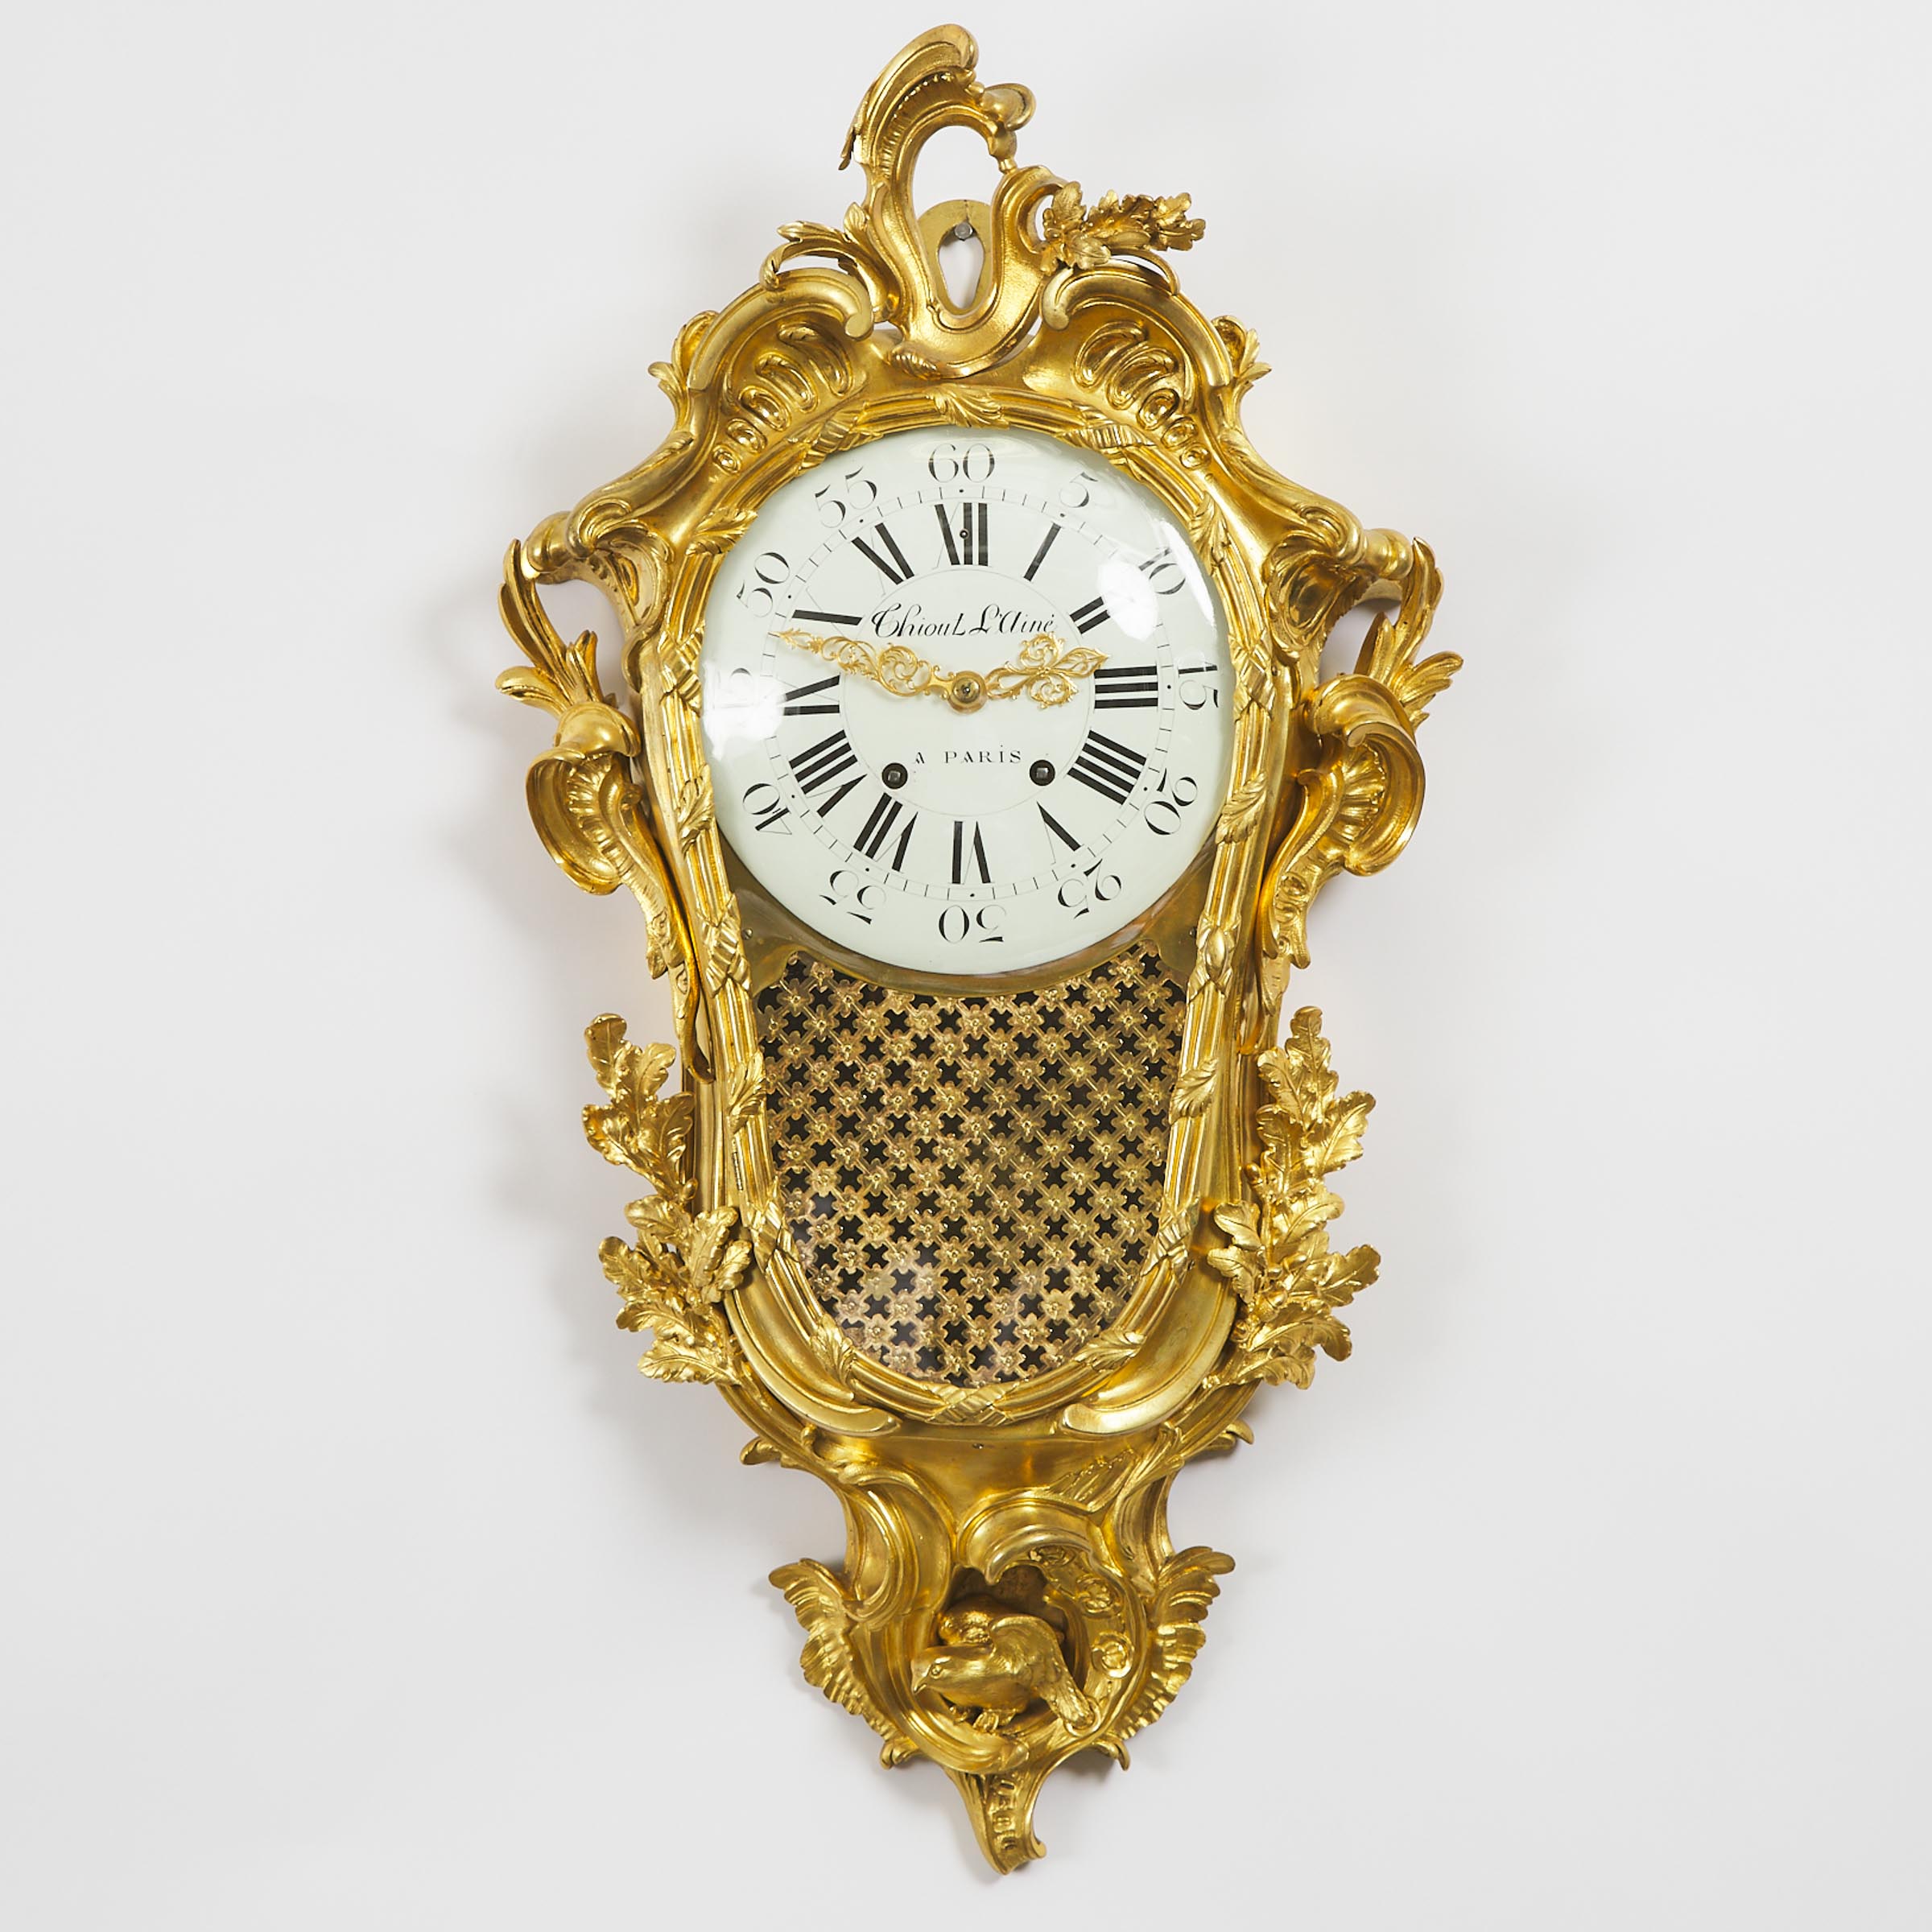 French Rococo Style Gilt Bronze Cartel Clock, Chiout L'Aine, Paris, mid-late 19th century